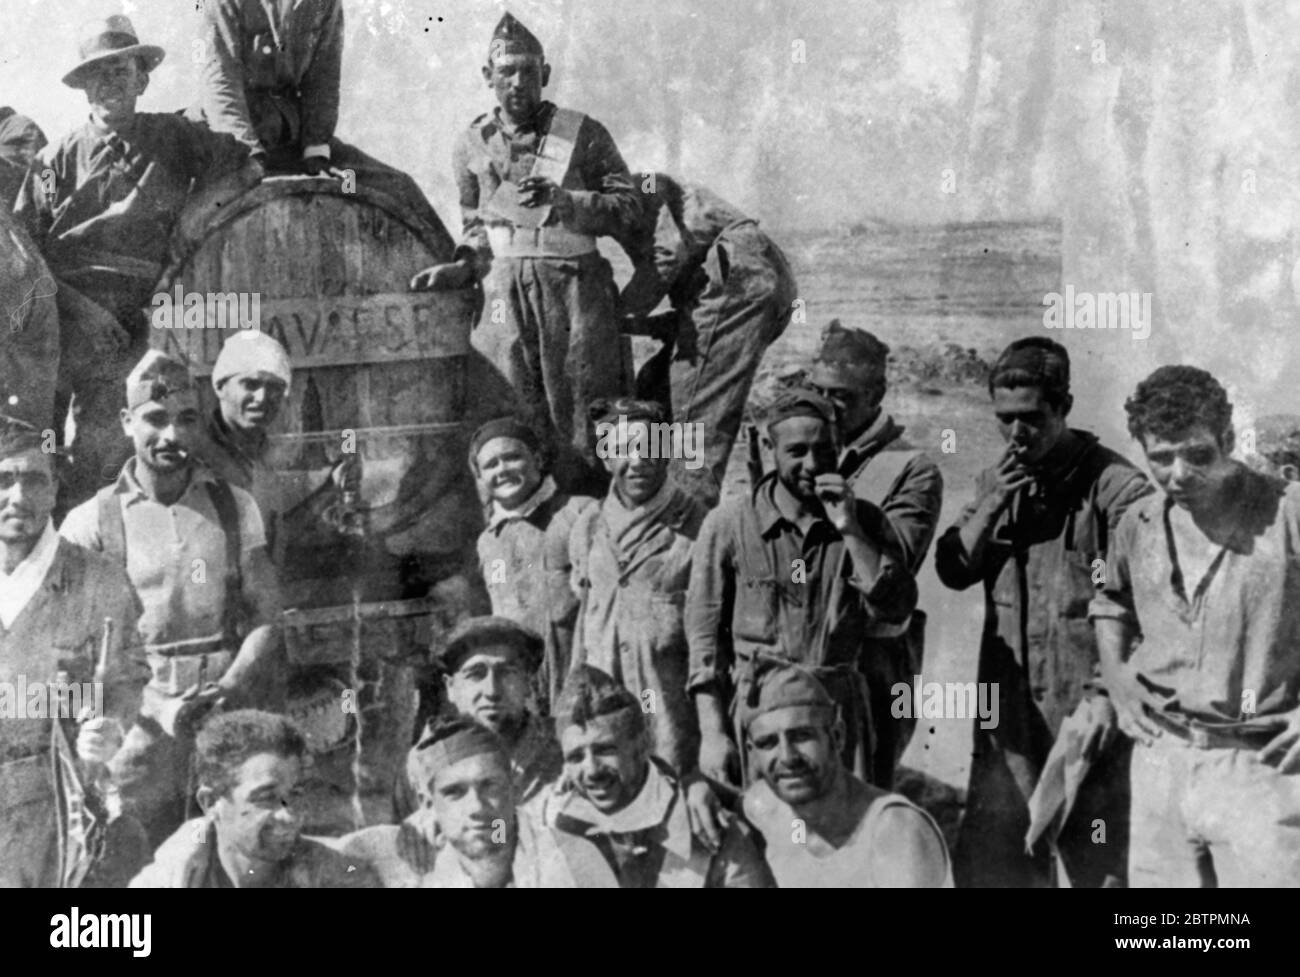 Relief for thirsty warriors . The problem of keeping the Spanish government militia men provided with drinking supplies is being solved on the Aragon front in the North by means of large casks carried from place to place . Photo shows loyalists gathered round a water cask on the Aragon front , 14 September 1936 Stock Photo